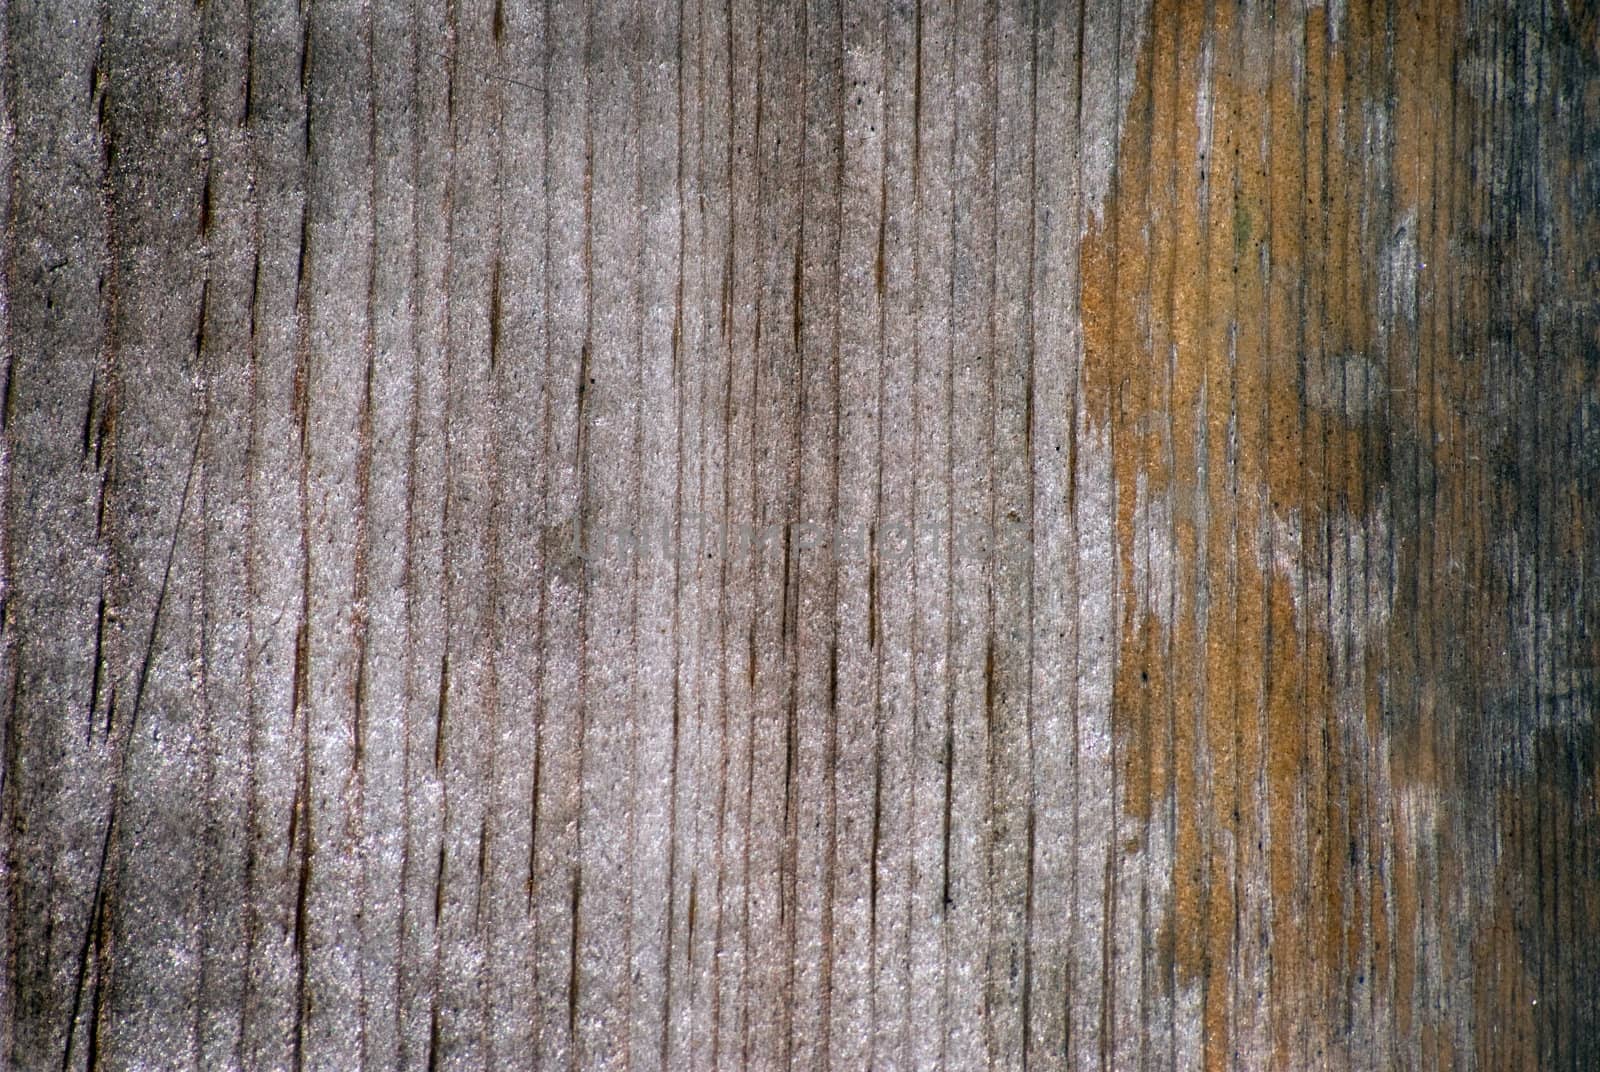 Wood grain in an old weathered board for grunge background use.